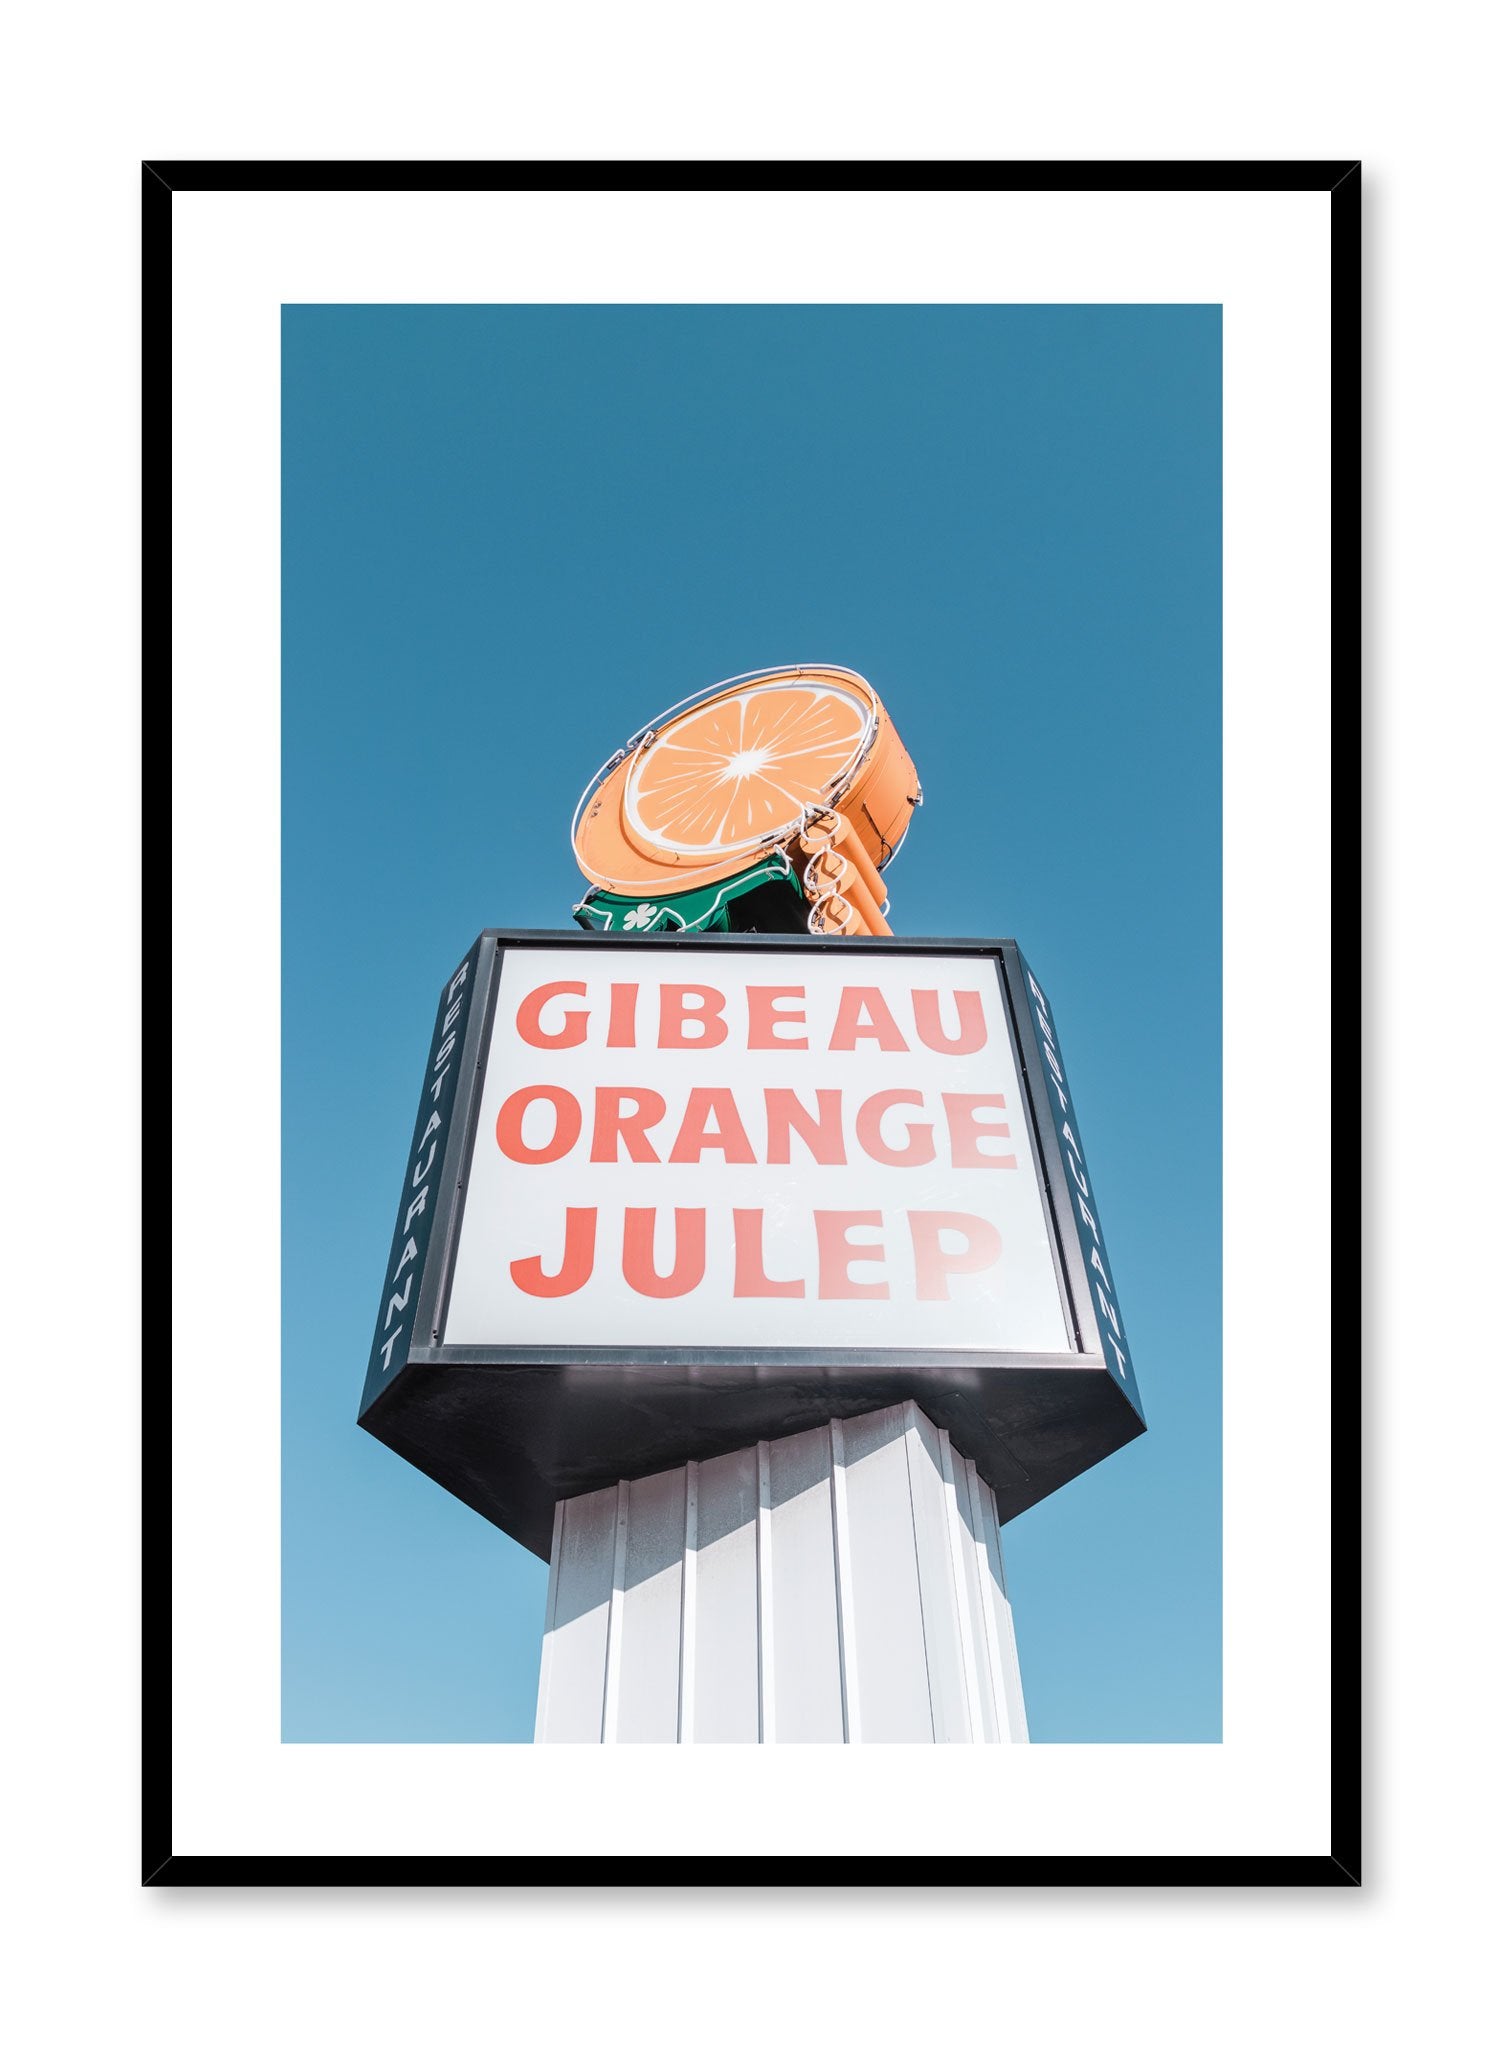 Minimalist design poster by Opposite Wall with urban street photography of Montreal Gibeau Orange Julep